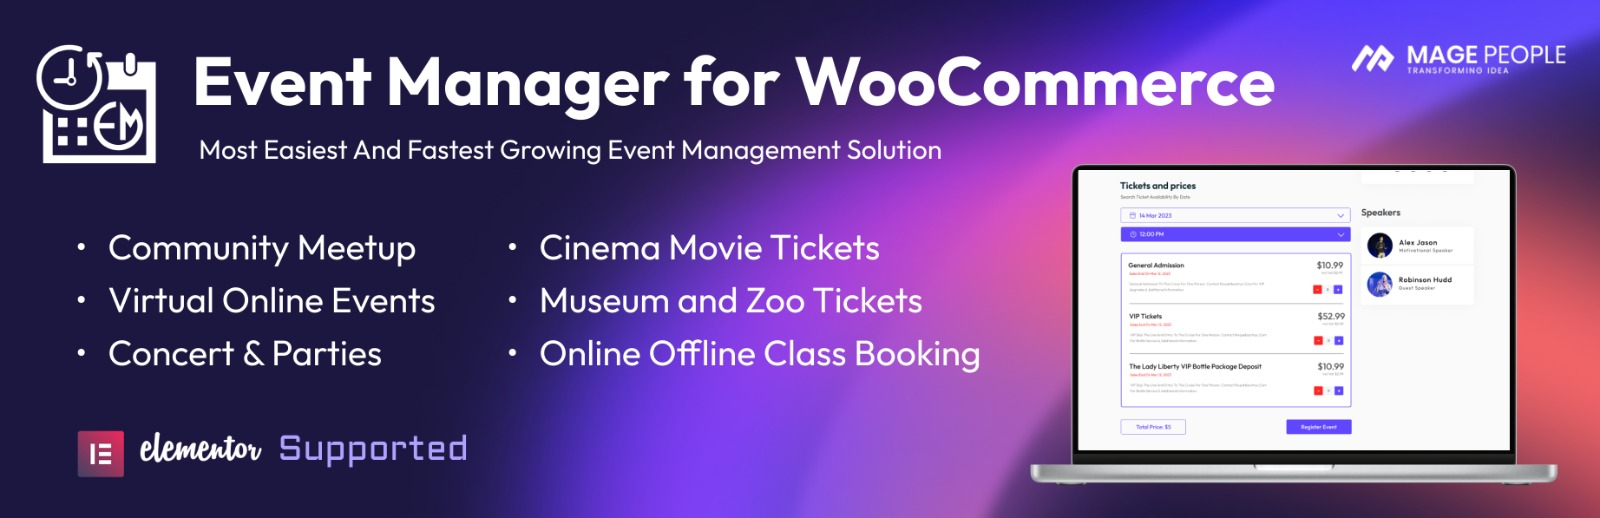 Event Manager and Tickets Selling Plugin for WooCommerce – WpEvently – WordPress Plugin